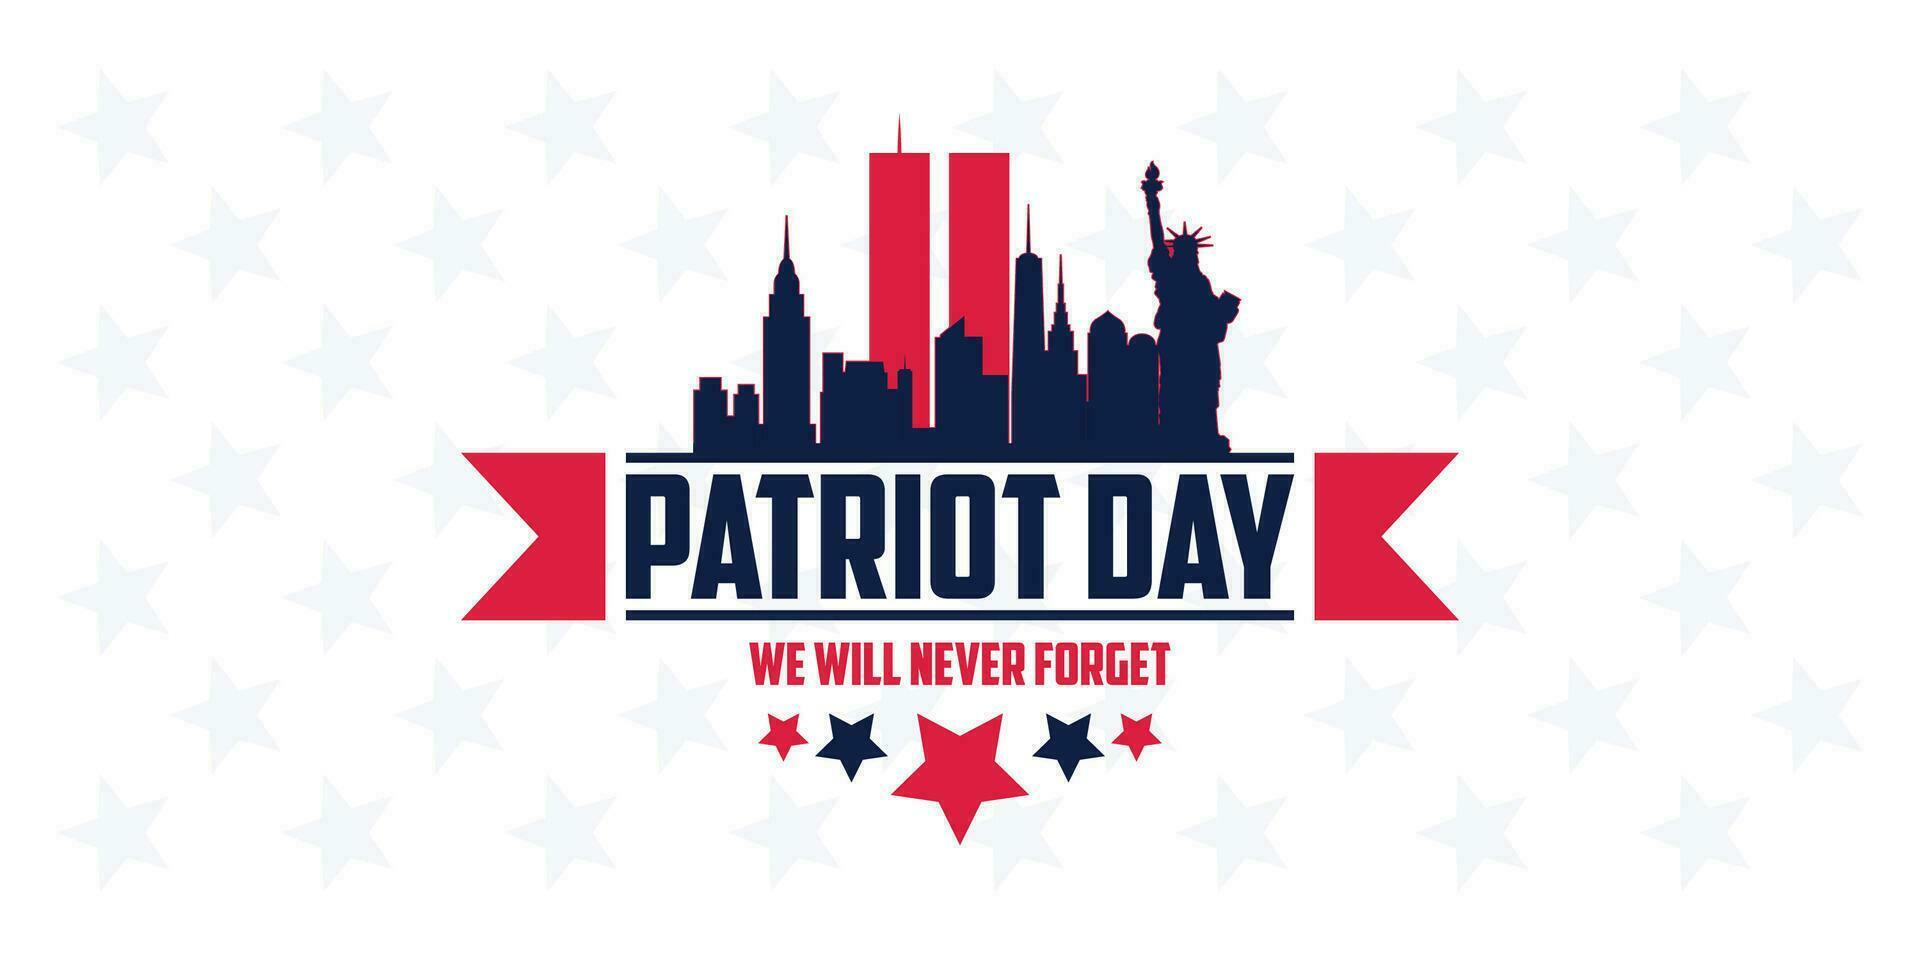 Patriot Day 9 11 9-11 9.11 nine eleven twin tower plane crash disaster 2022 vector